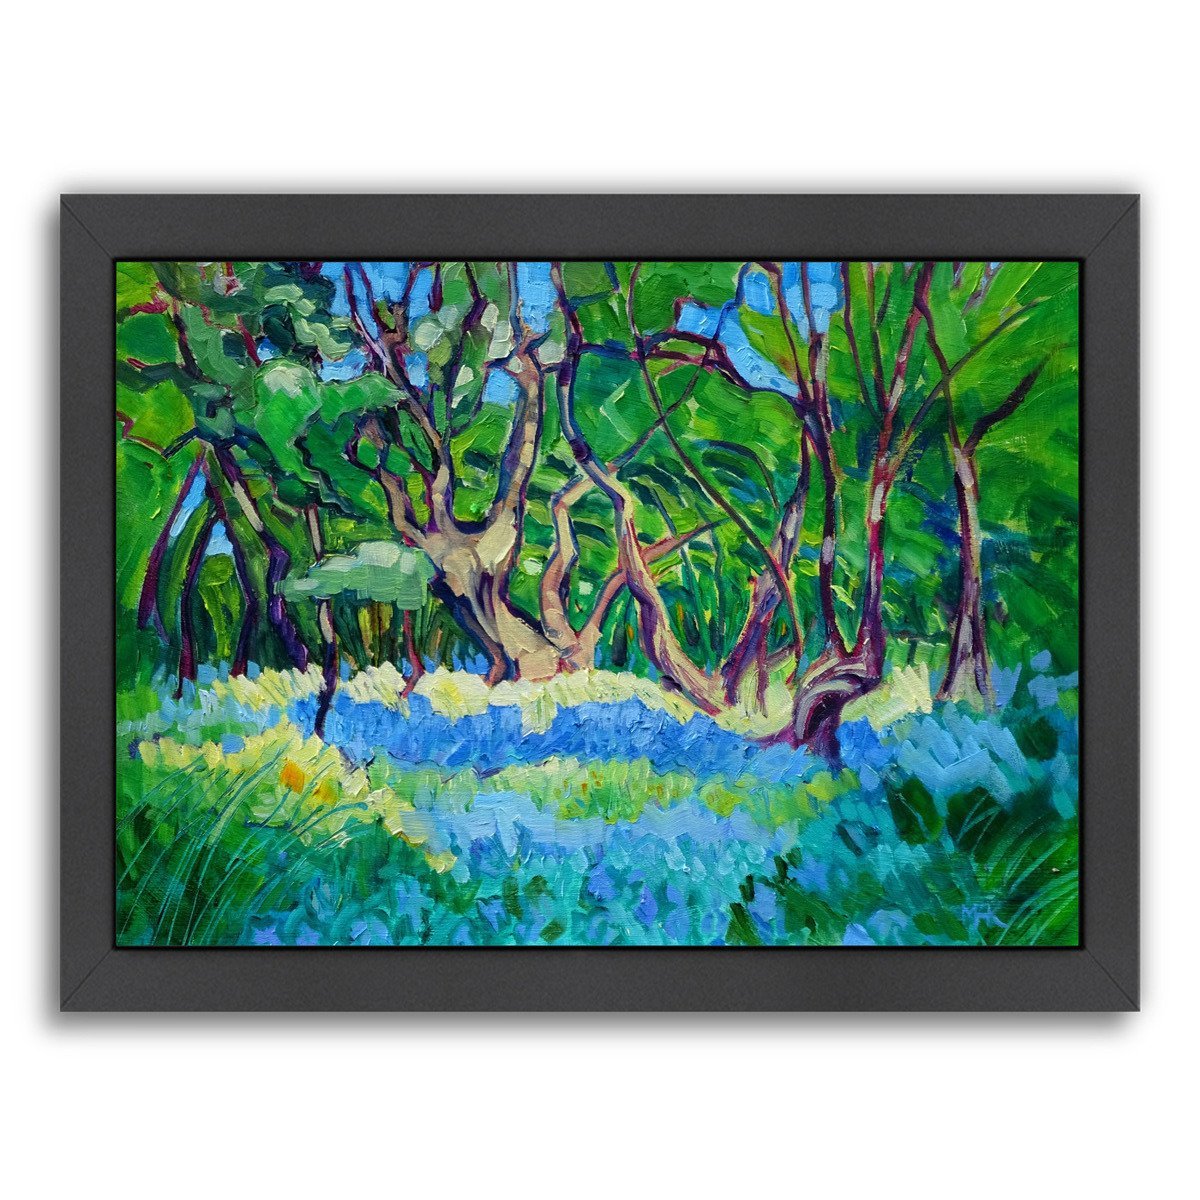 Bluebell Wood By Mary Kemp - Black Framed Print - Wall Art - Americanflat